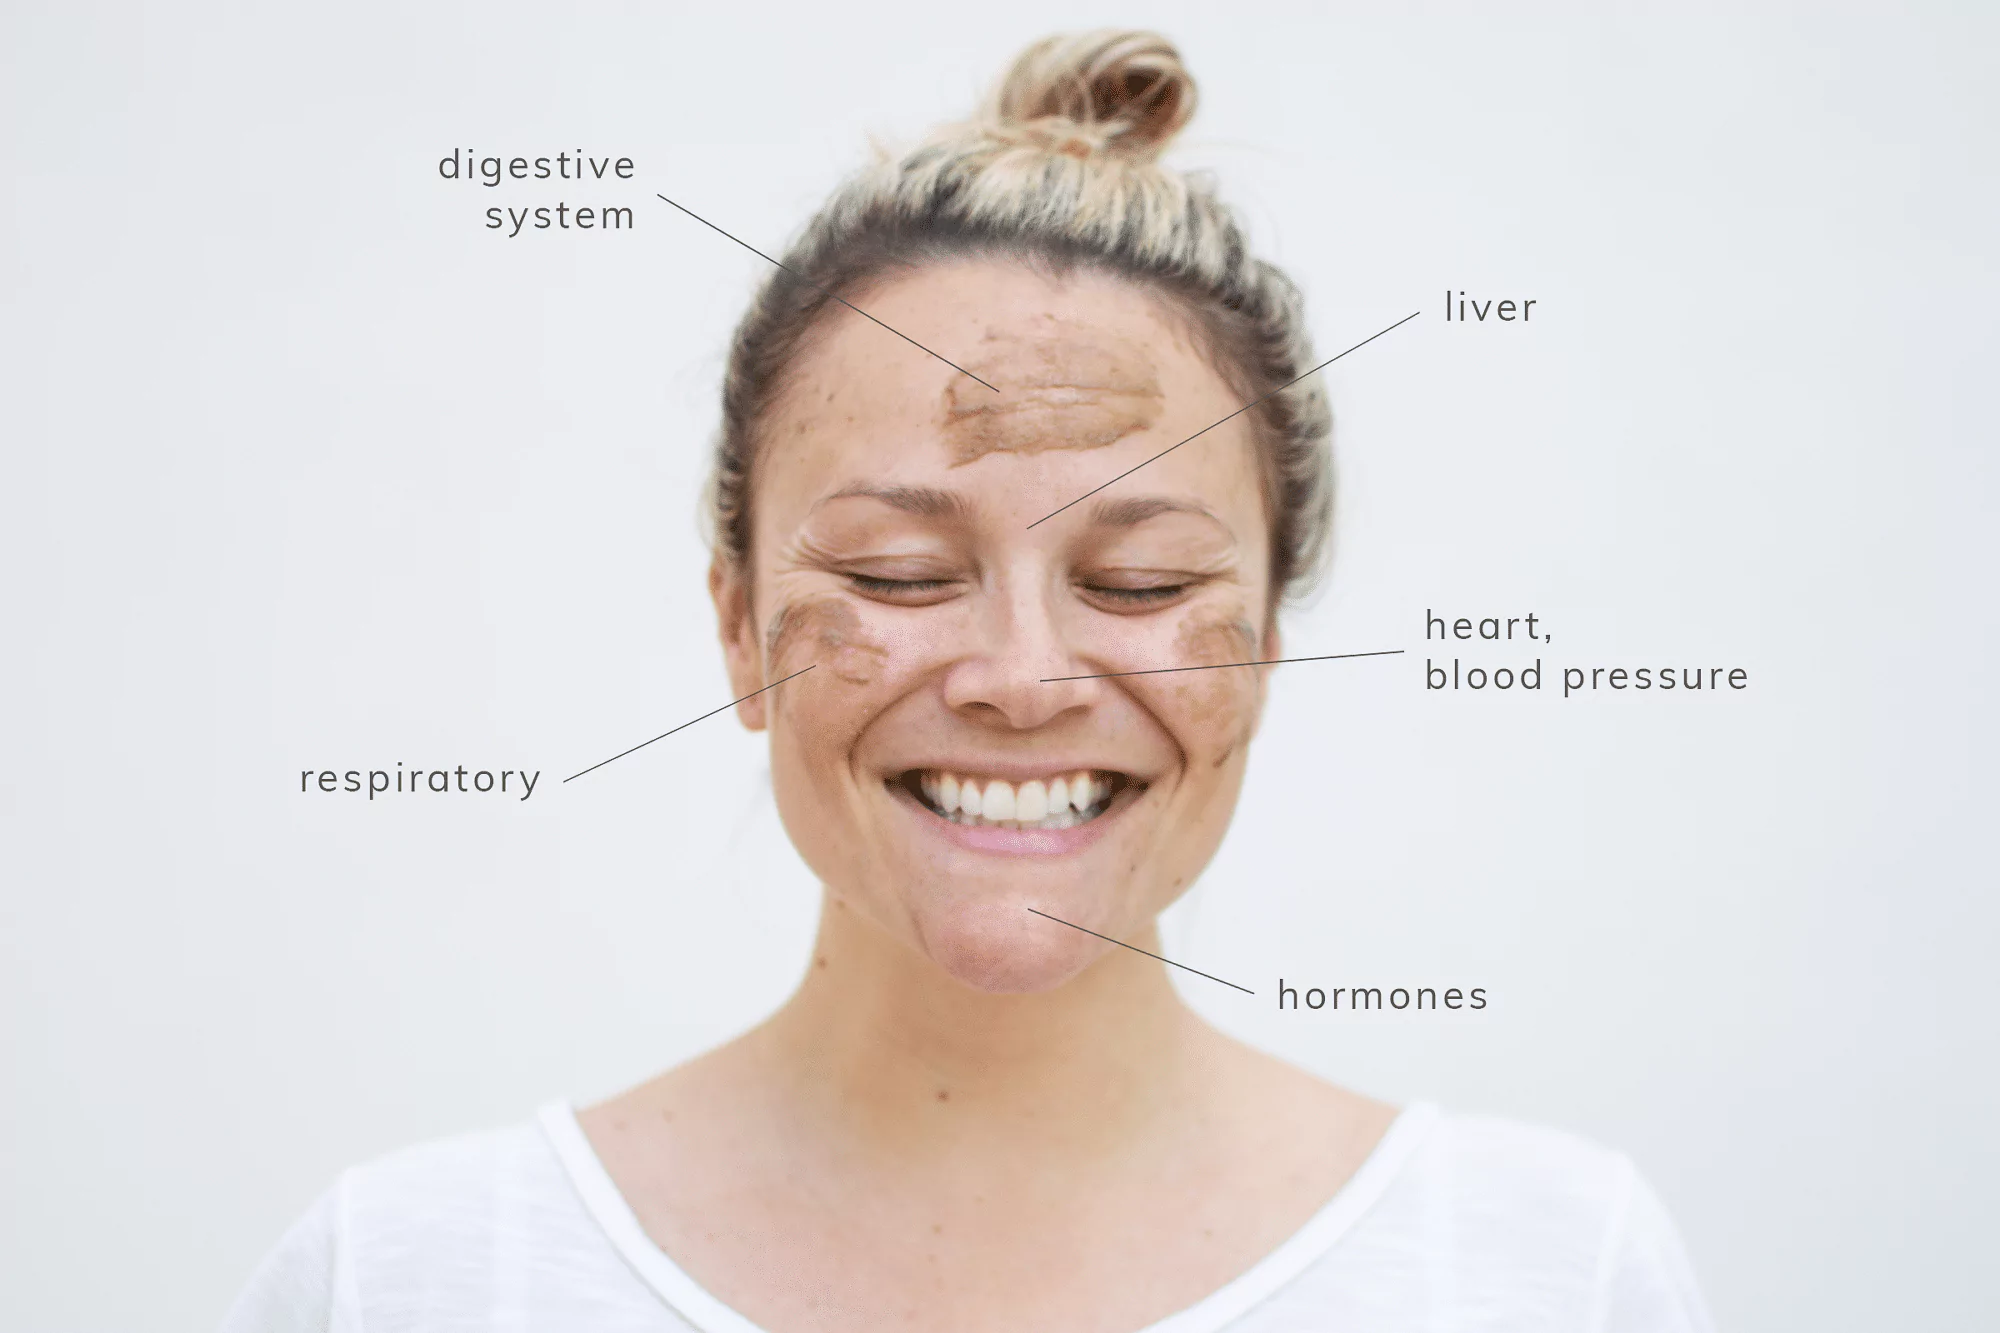 Face mapping your acne and what it means on your face revealed